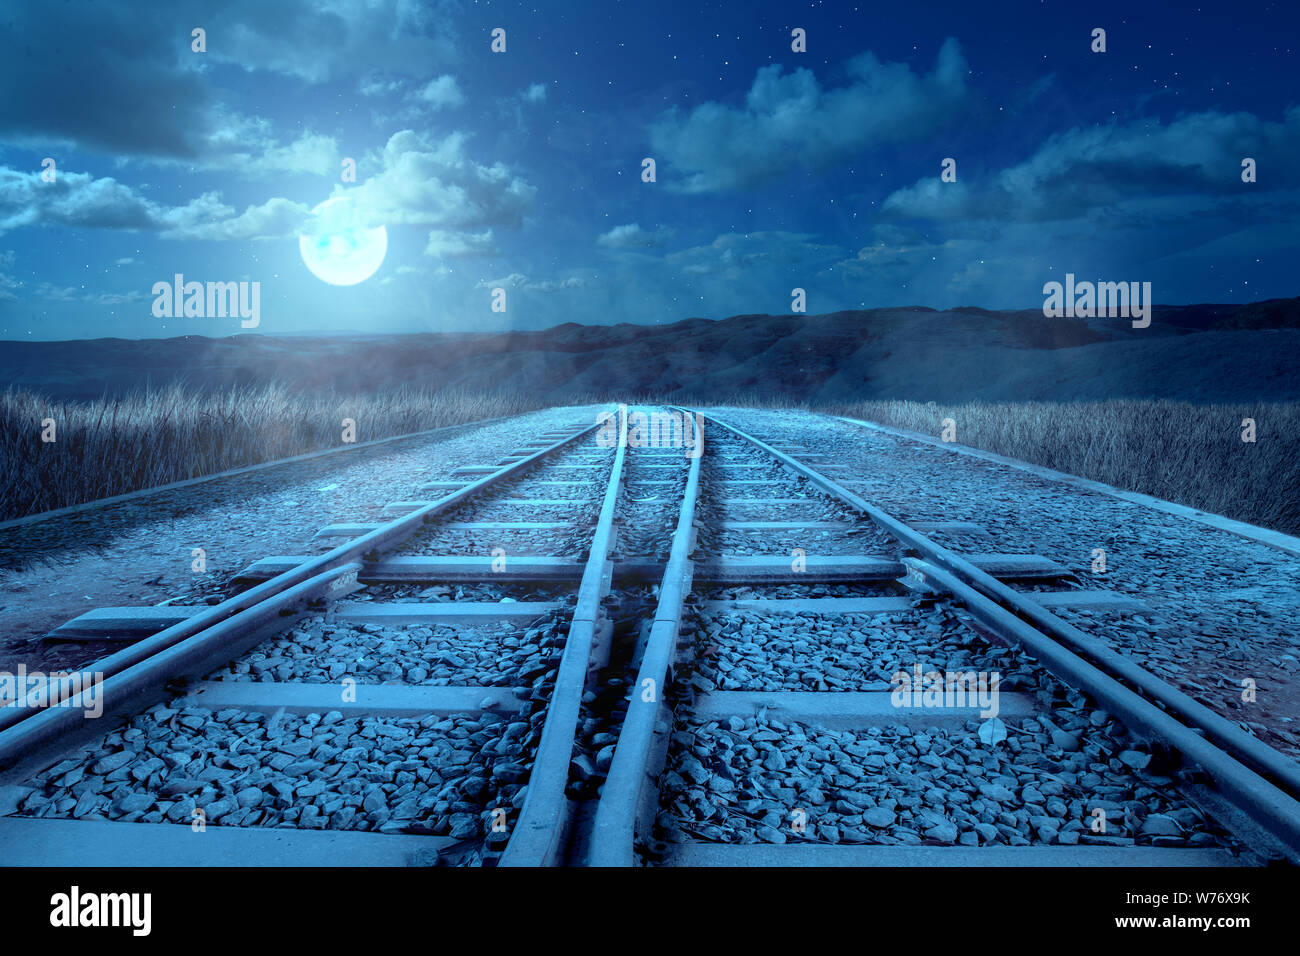 The crossing of a railroad track on the hills with a scary night scene. Halloween background Stock Photo